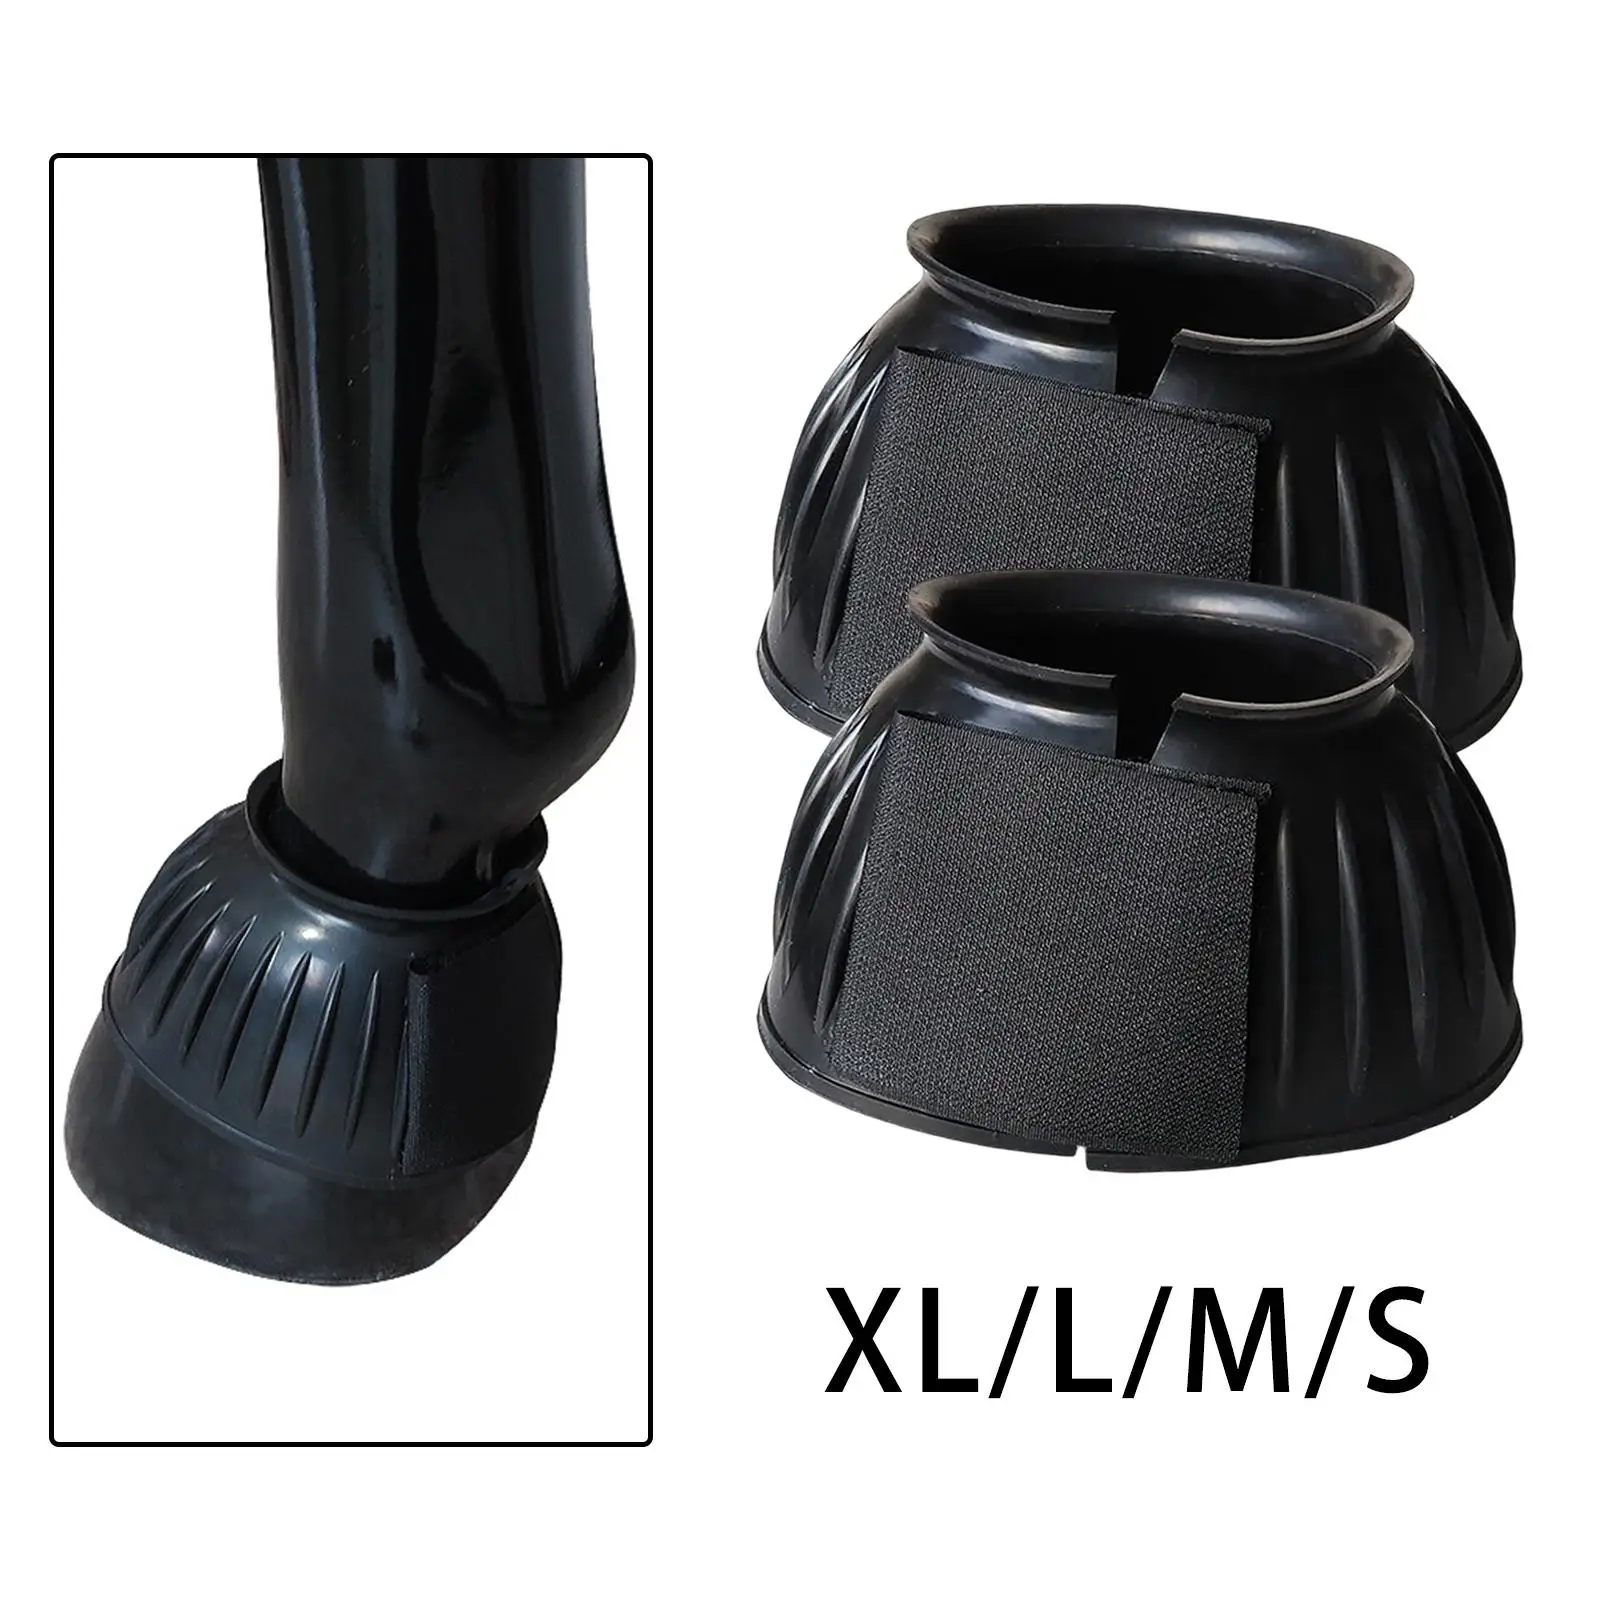 2x Horse Bell Boots Overreach Boot Professional Durable Equine Hoof Protector